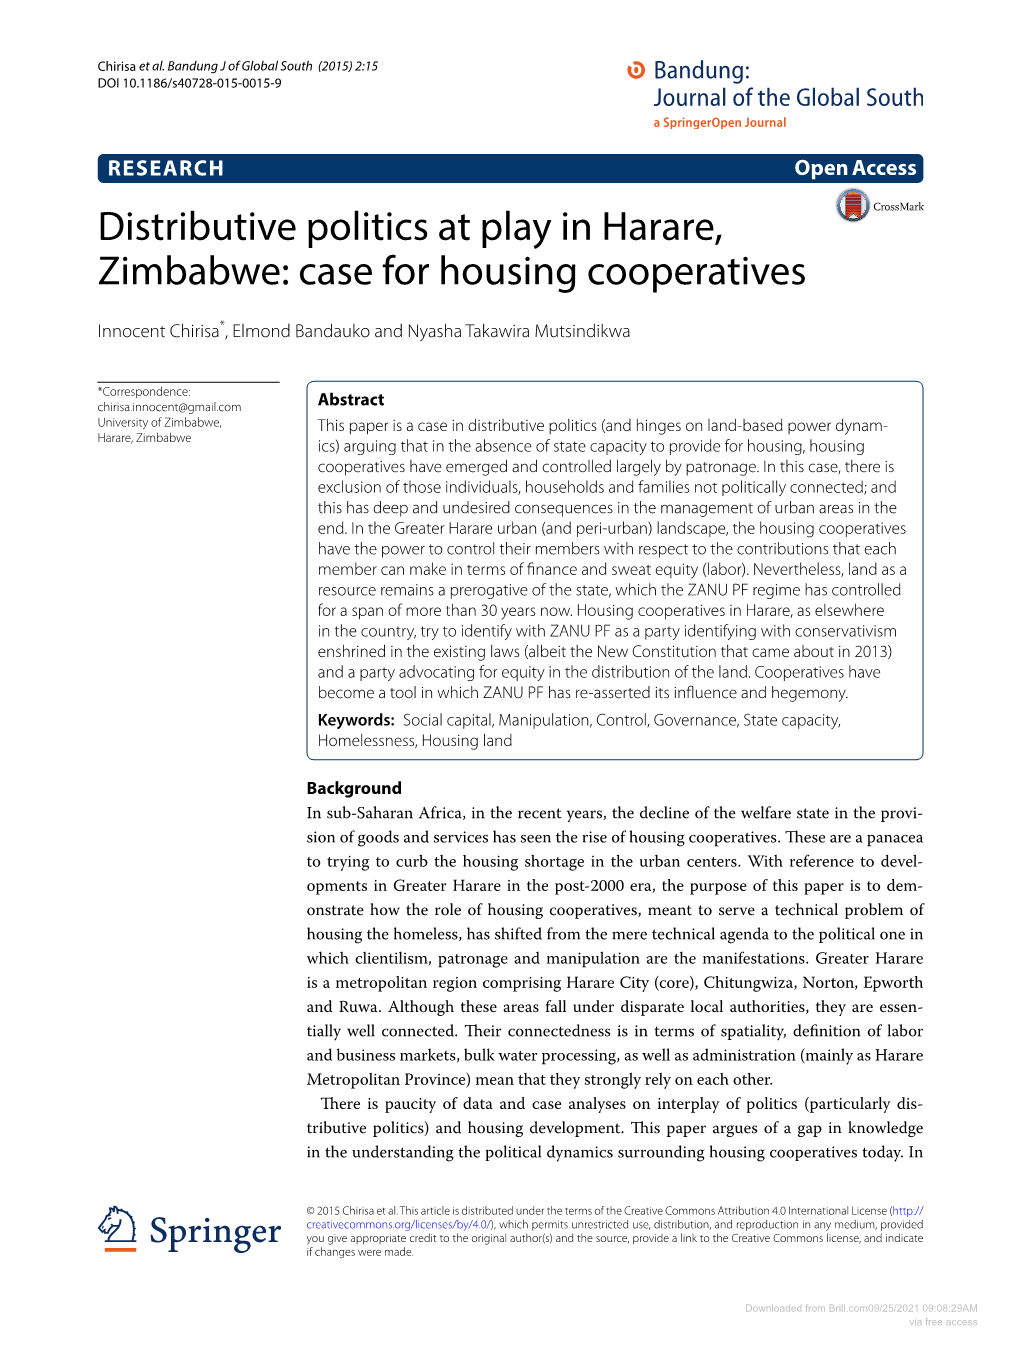 Distributive Politics at Play in Harare, Zimbabwe: Case for Housing Cooperatives